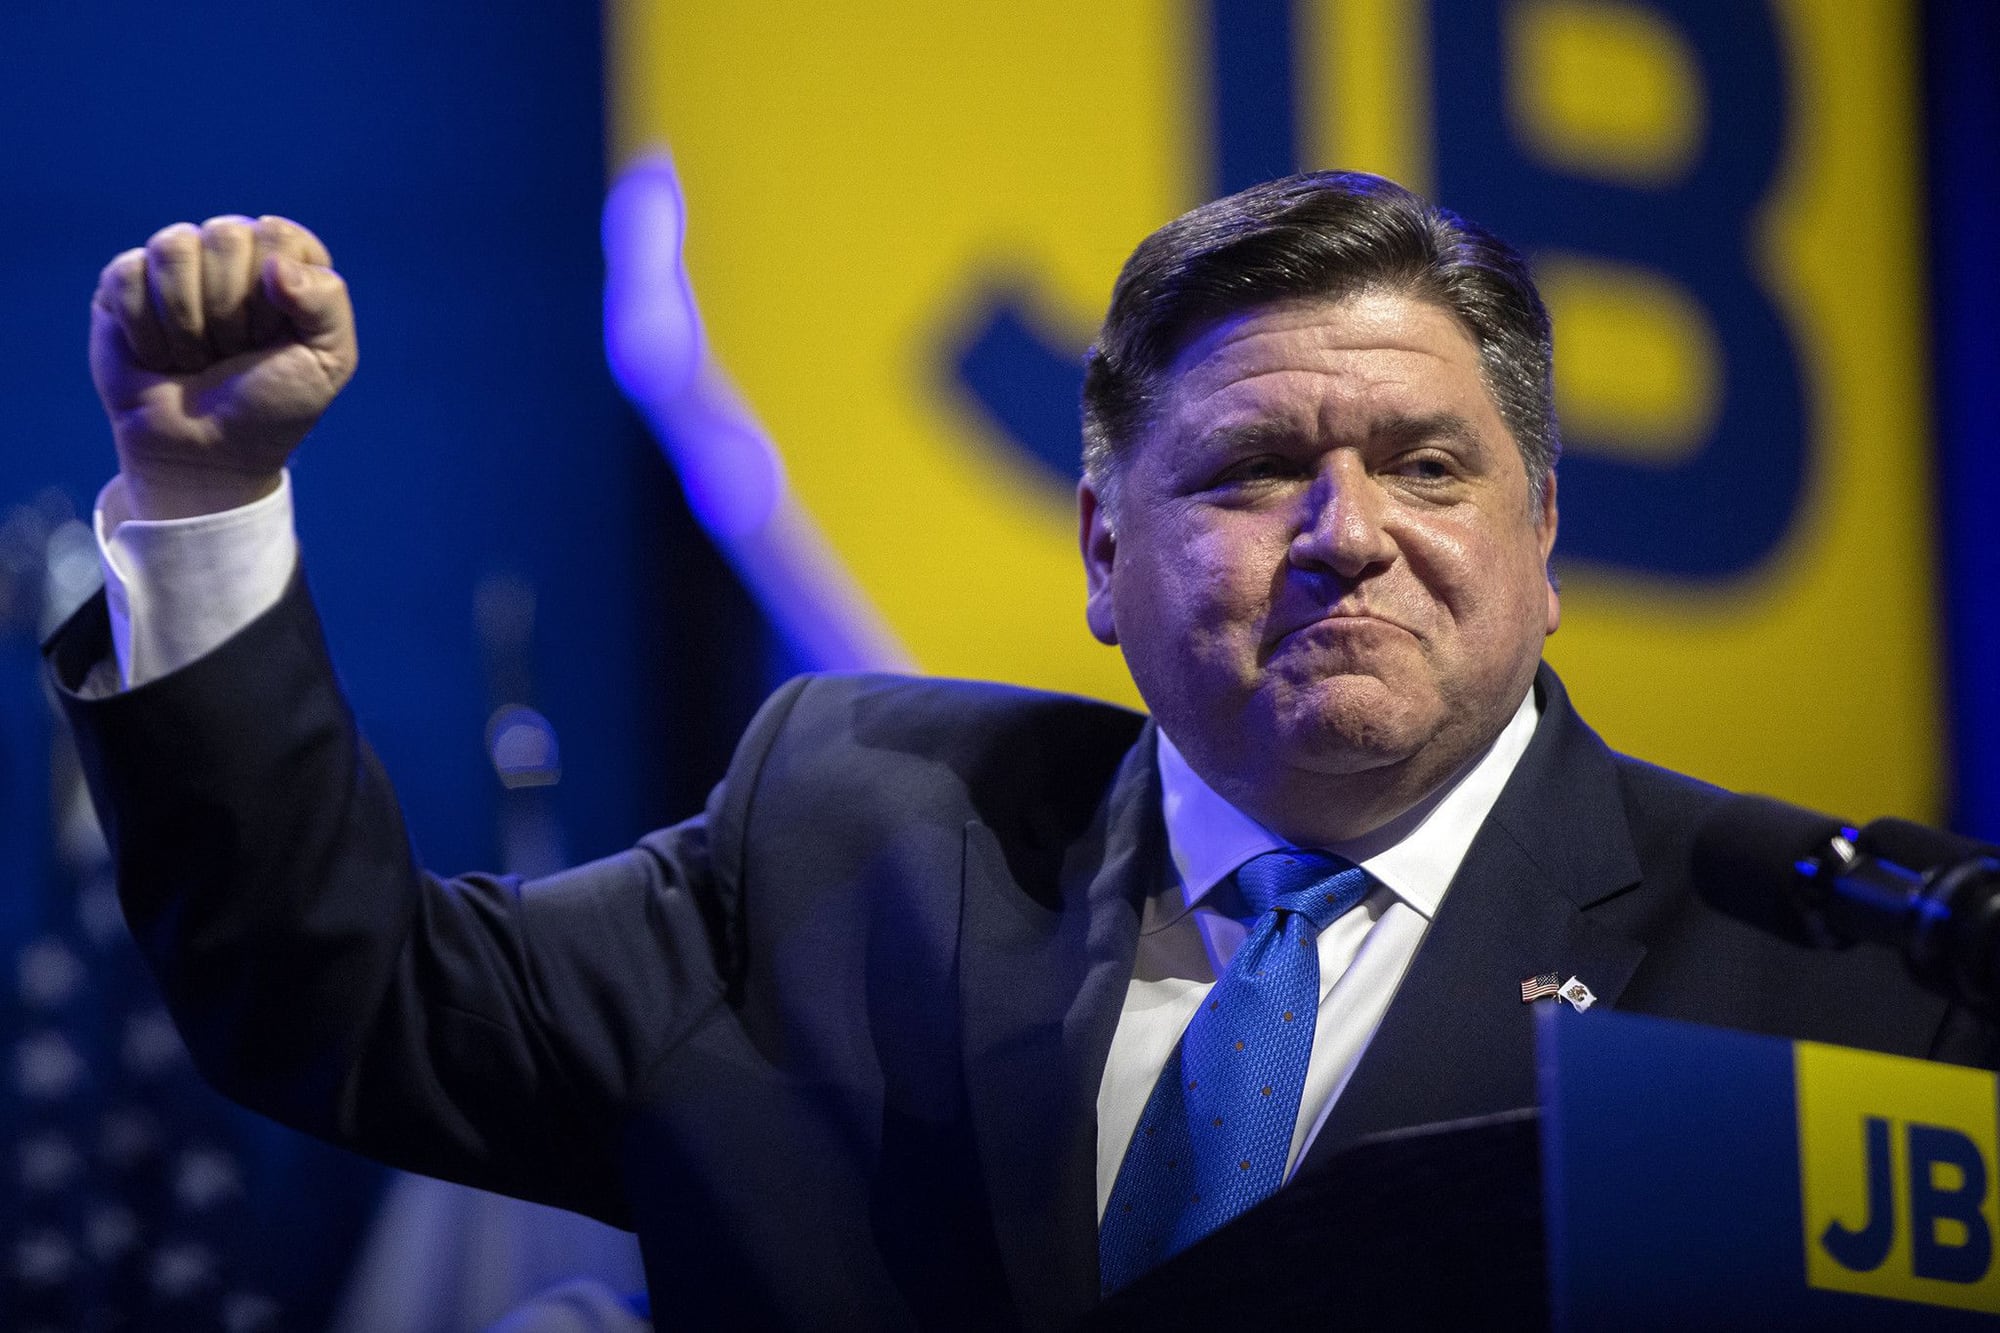 Gov. J.B. Pritzker stands at a podium with his fist raised in the area with a blue and yellow sign in the background with JB behind him